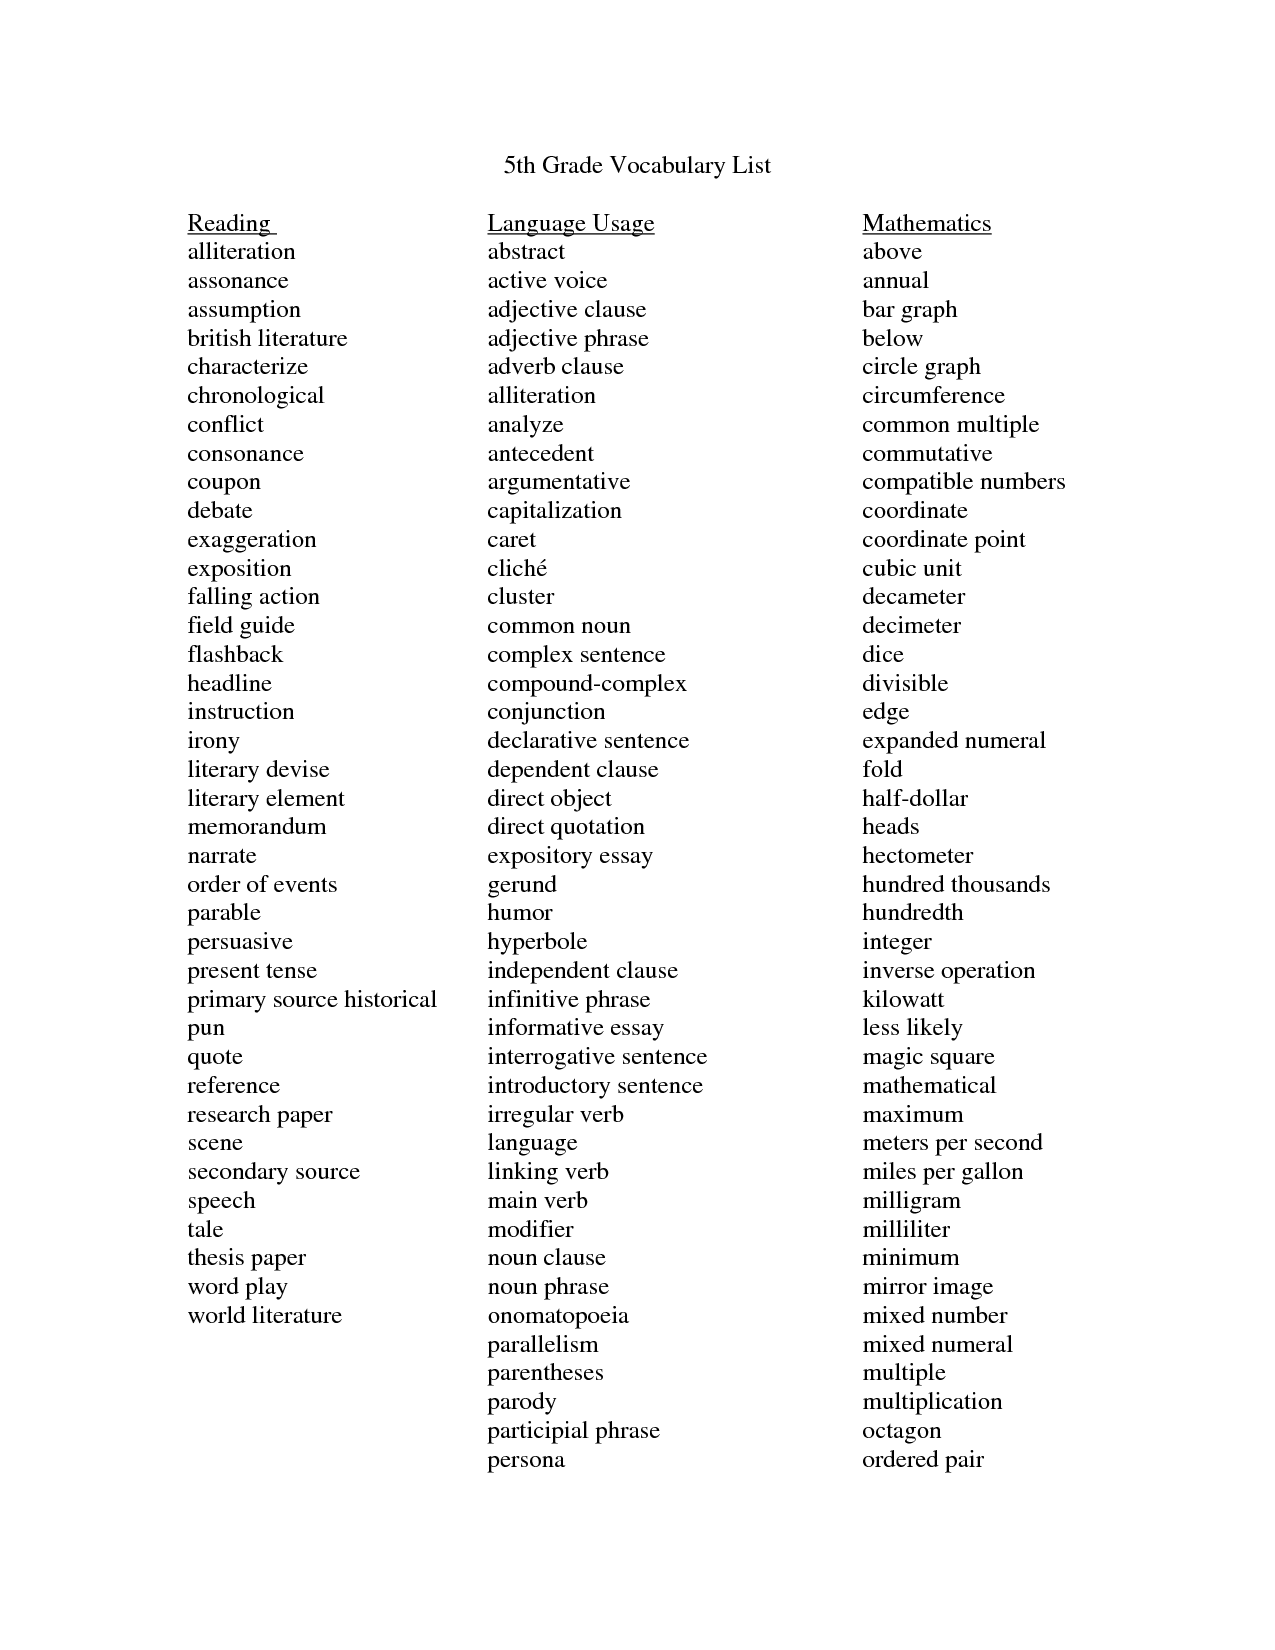 15 Best Images of 5th Grade Reading Vocabulary Worksheets - 5th Grade ...